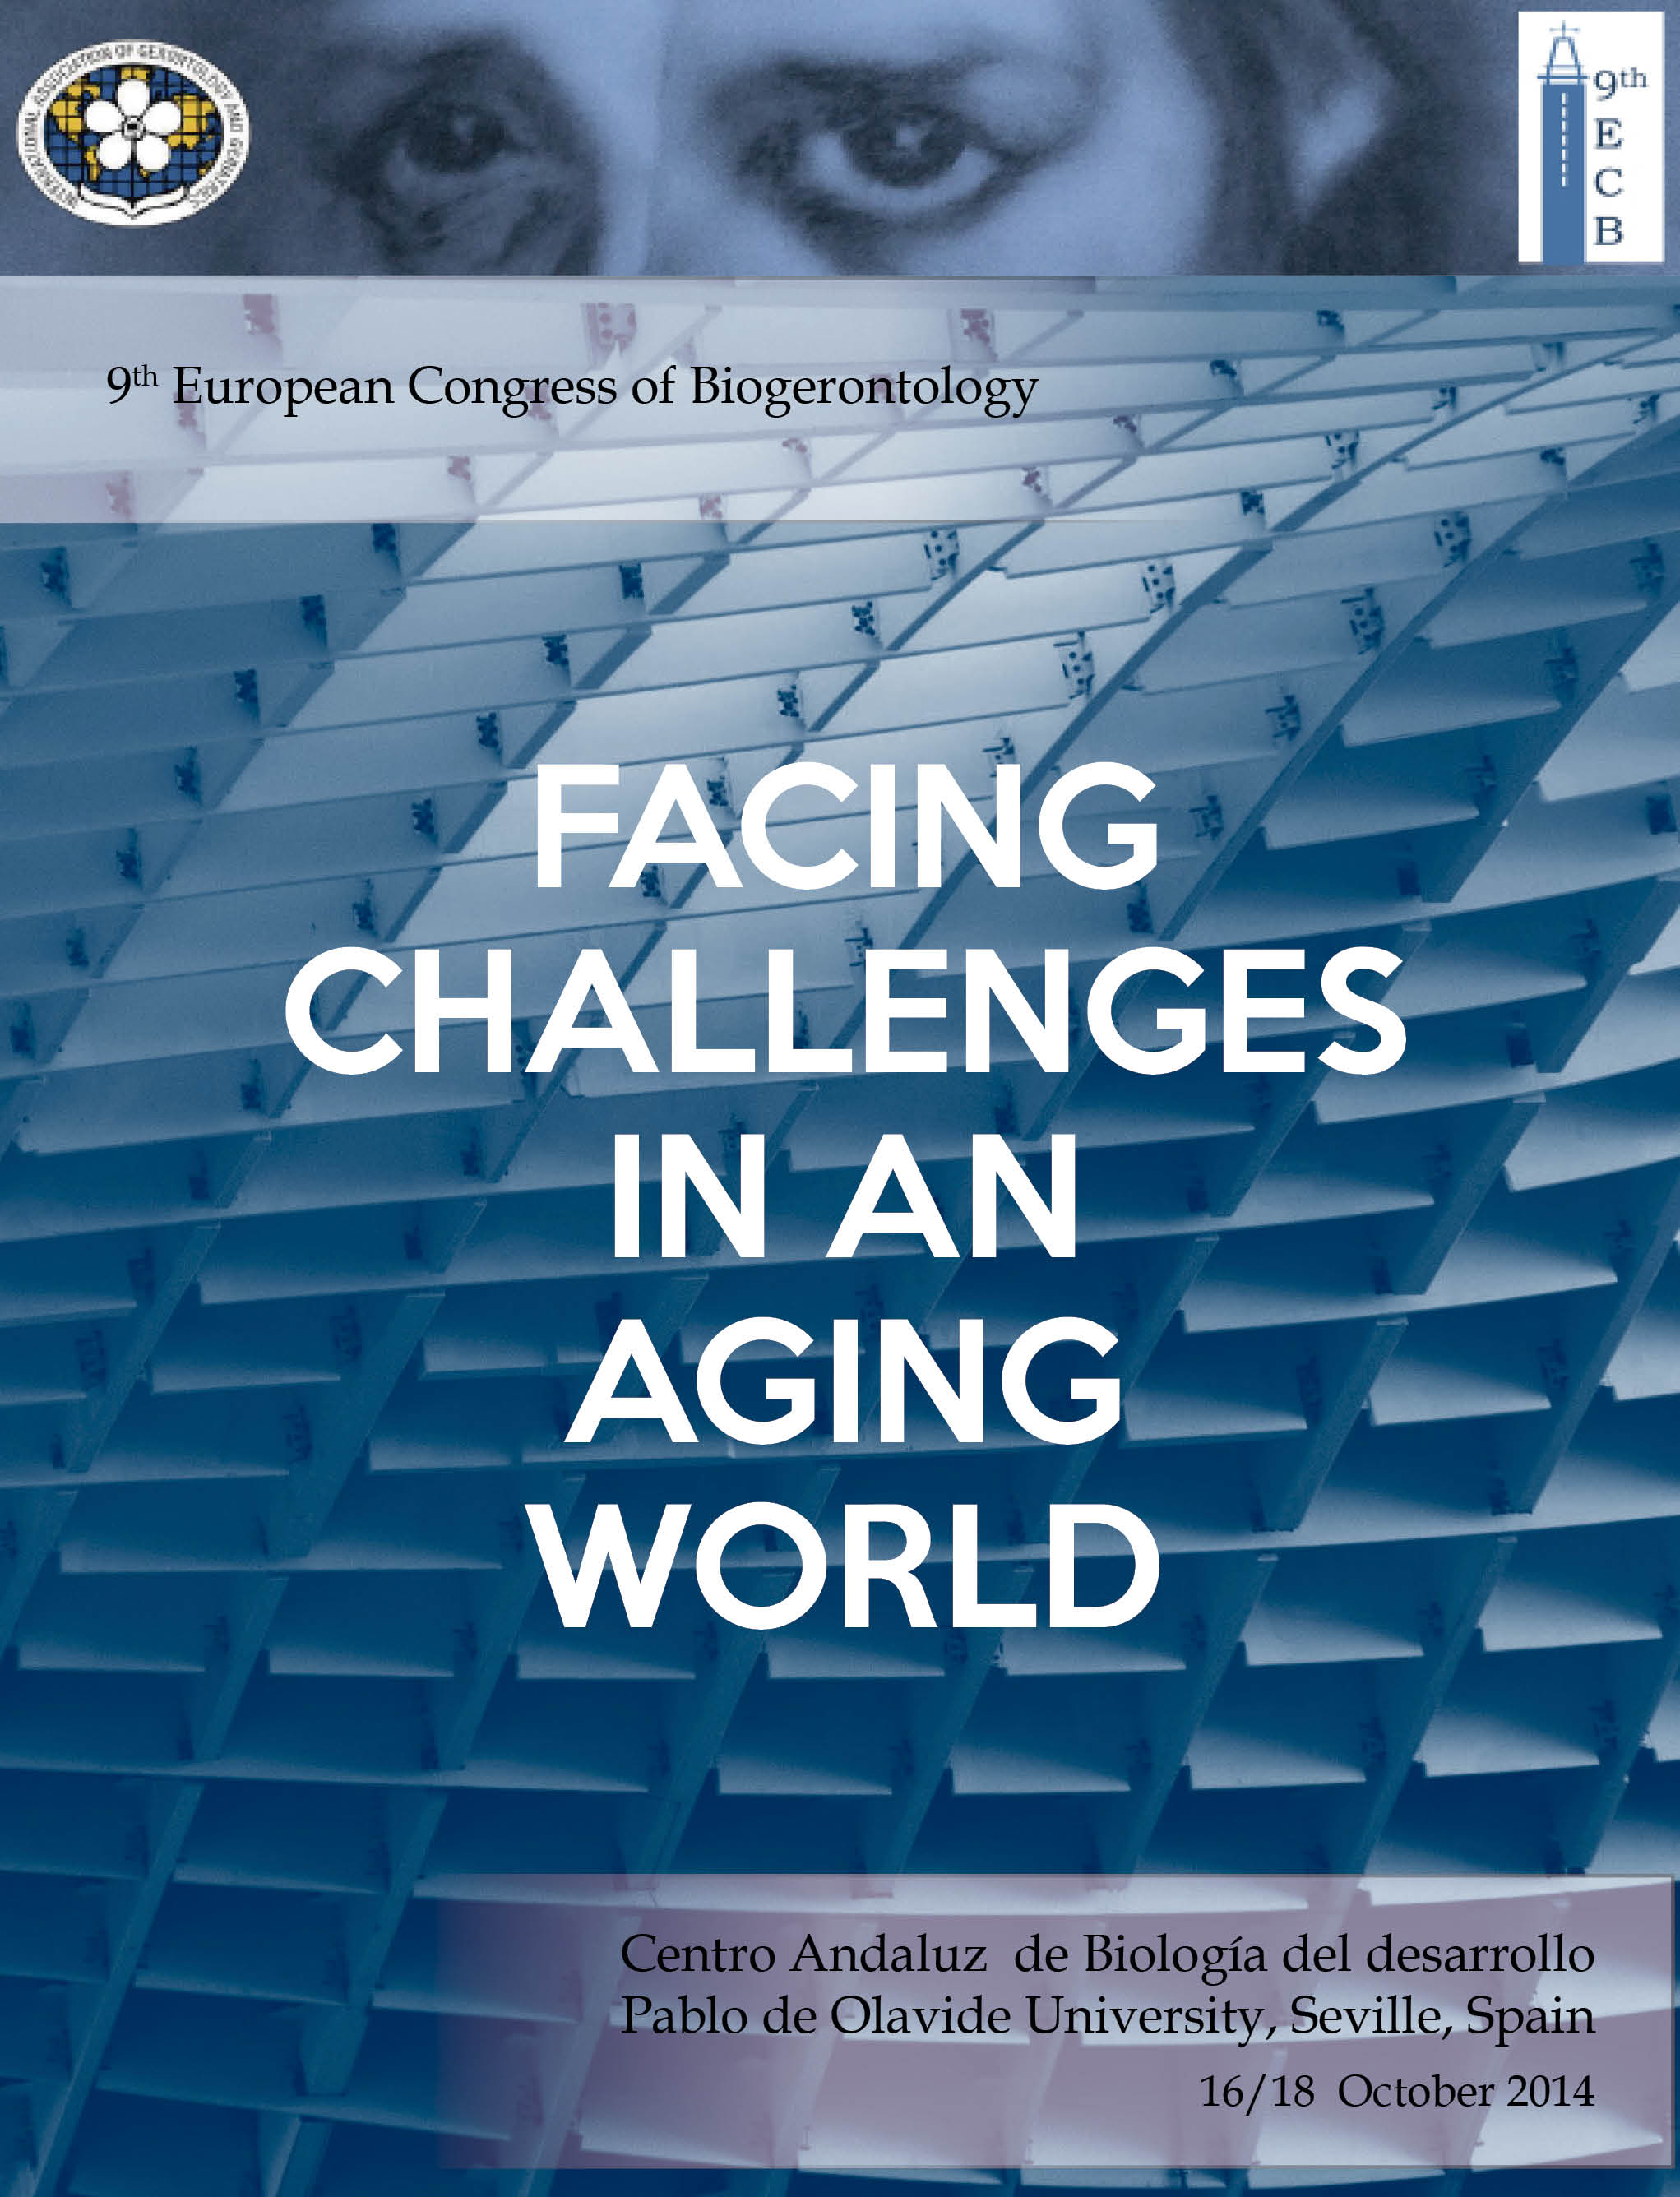 Facing Challenges in an Aging World [9th European Congress of Biogerontology]